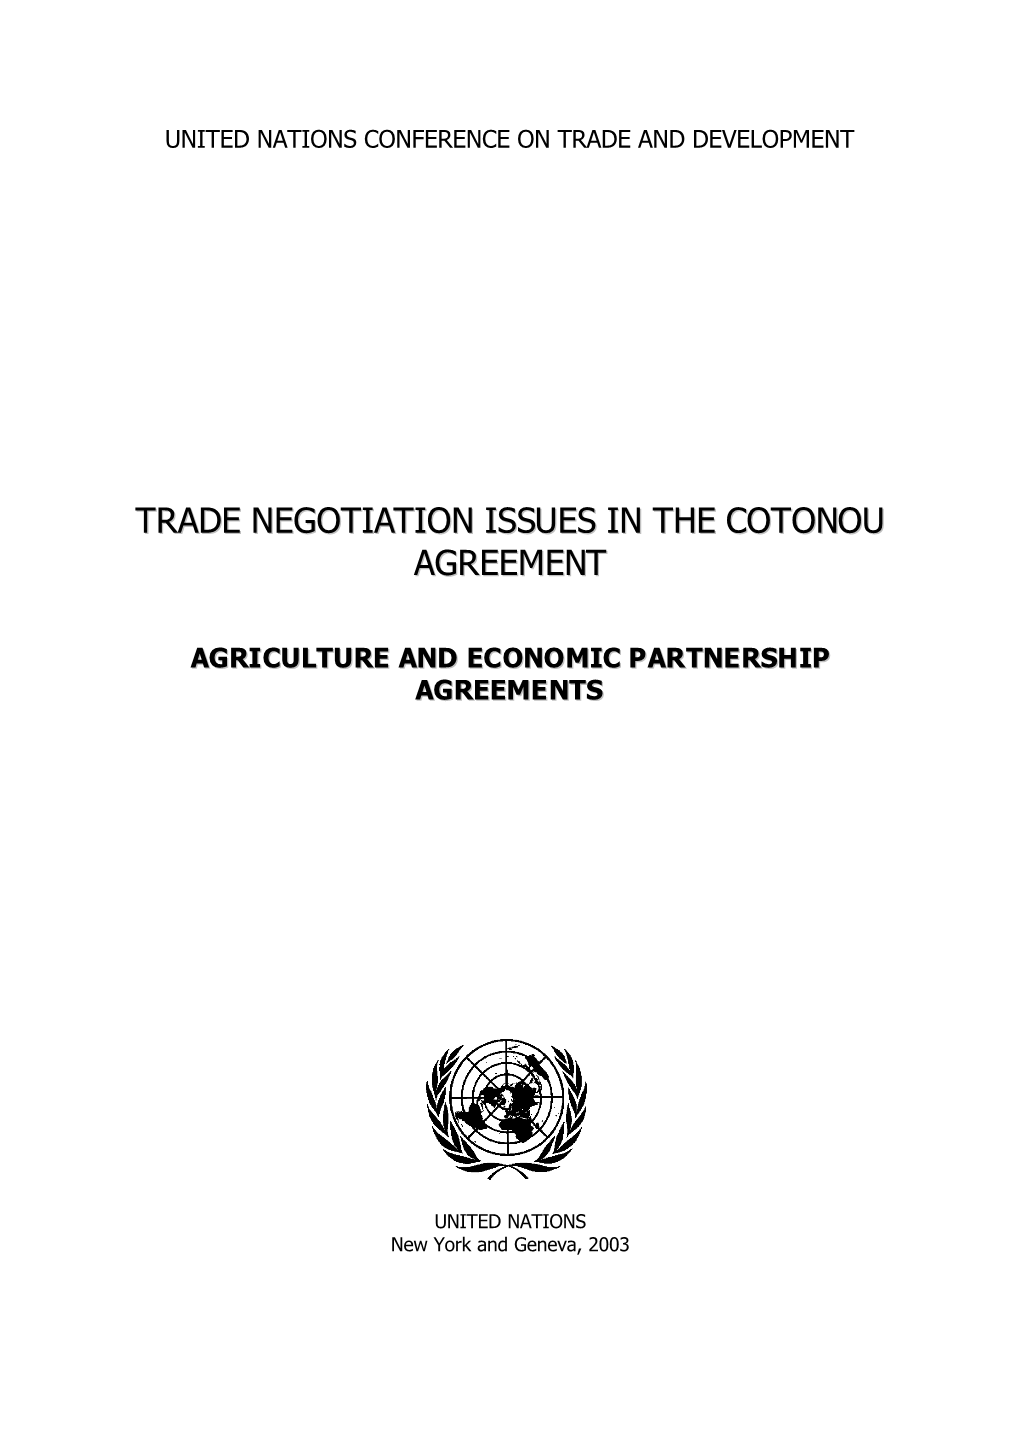 Trade Negotiation Issues in the Cotonou Agreement